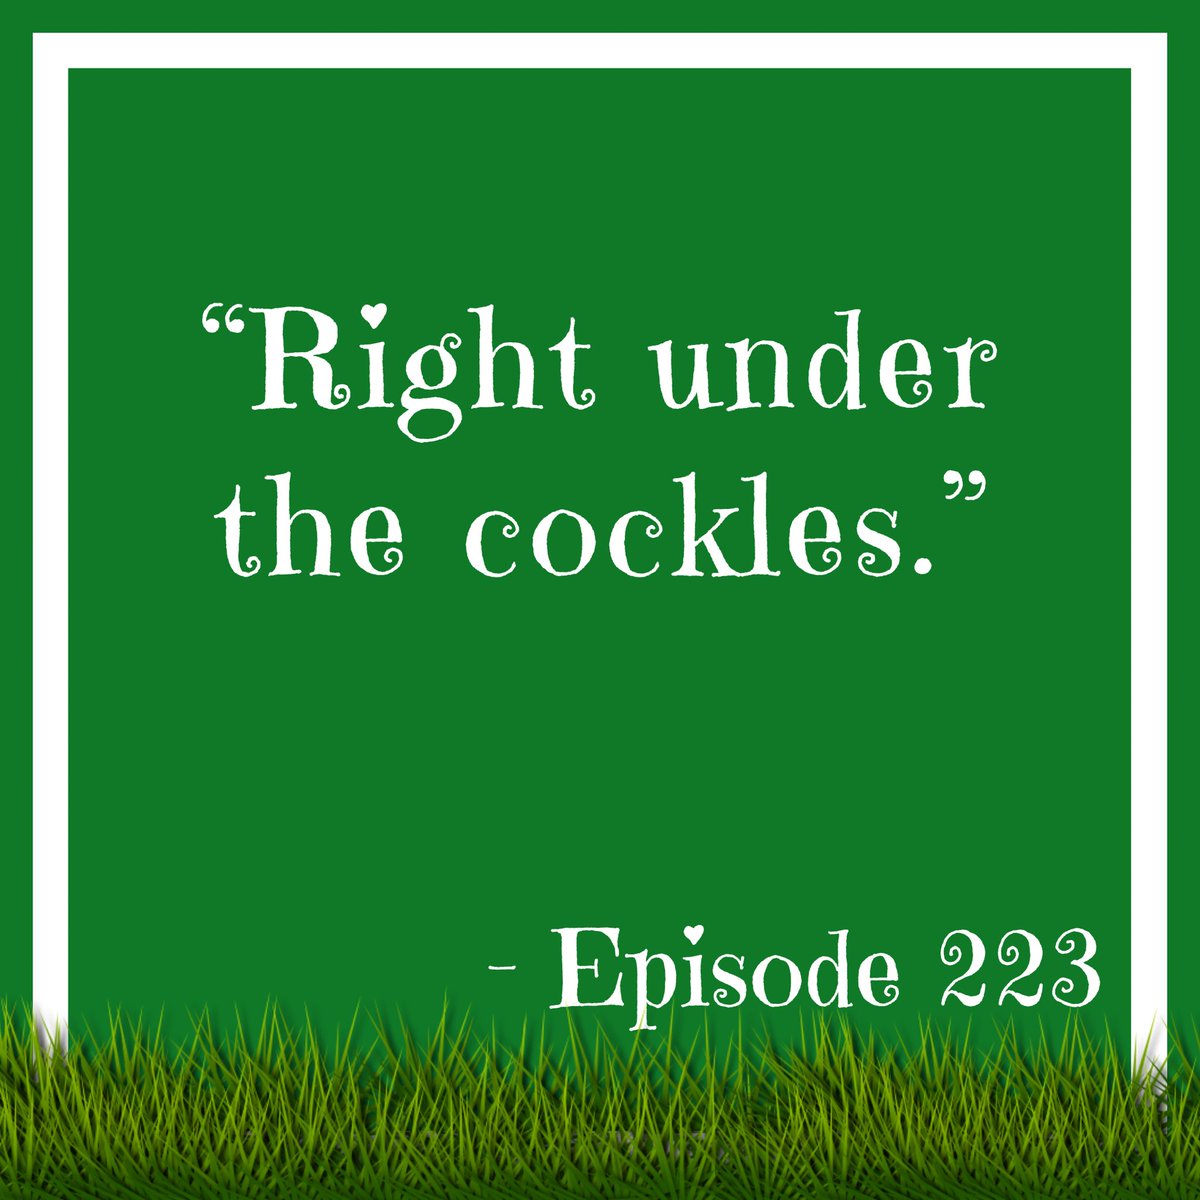 That’s What She Said 

#thegreenergrasspodcast  #greenergrasspodcast #podcast #offthetonguepodcastnetwork #girlswhopodcast #wouldyourather  #prosandcons #pro #con #youhavetopickone #youtube #spotify #patreon #travel #lay #stay #airplane #thatswhatshesaid #cockles